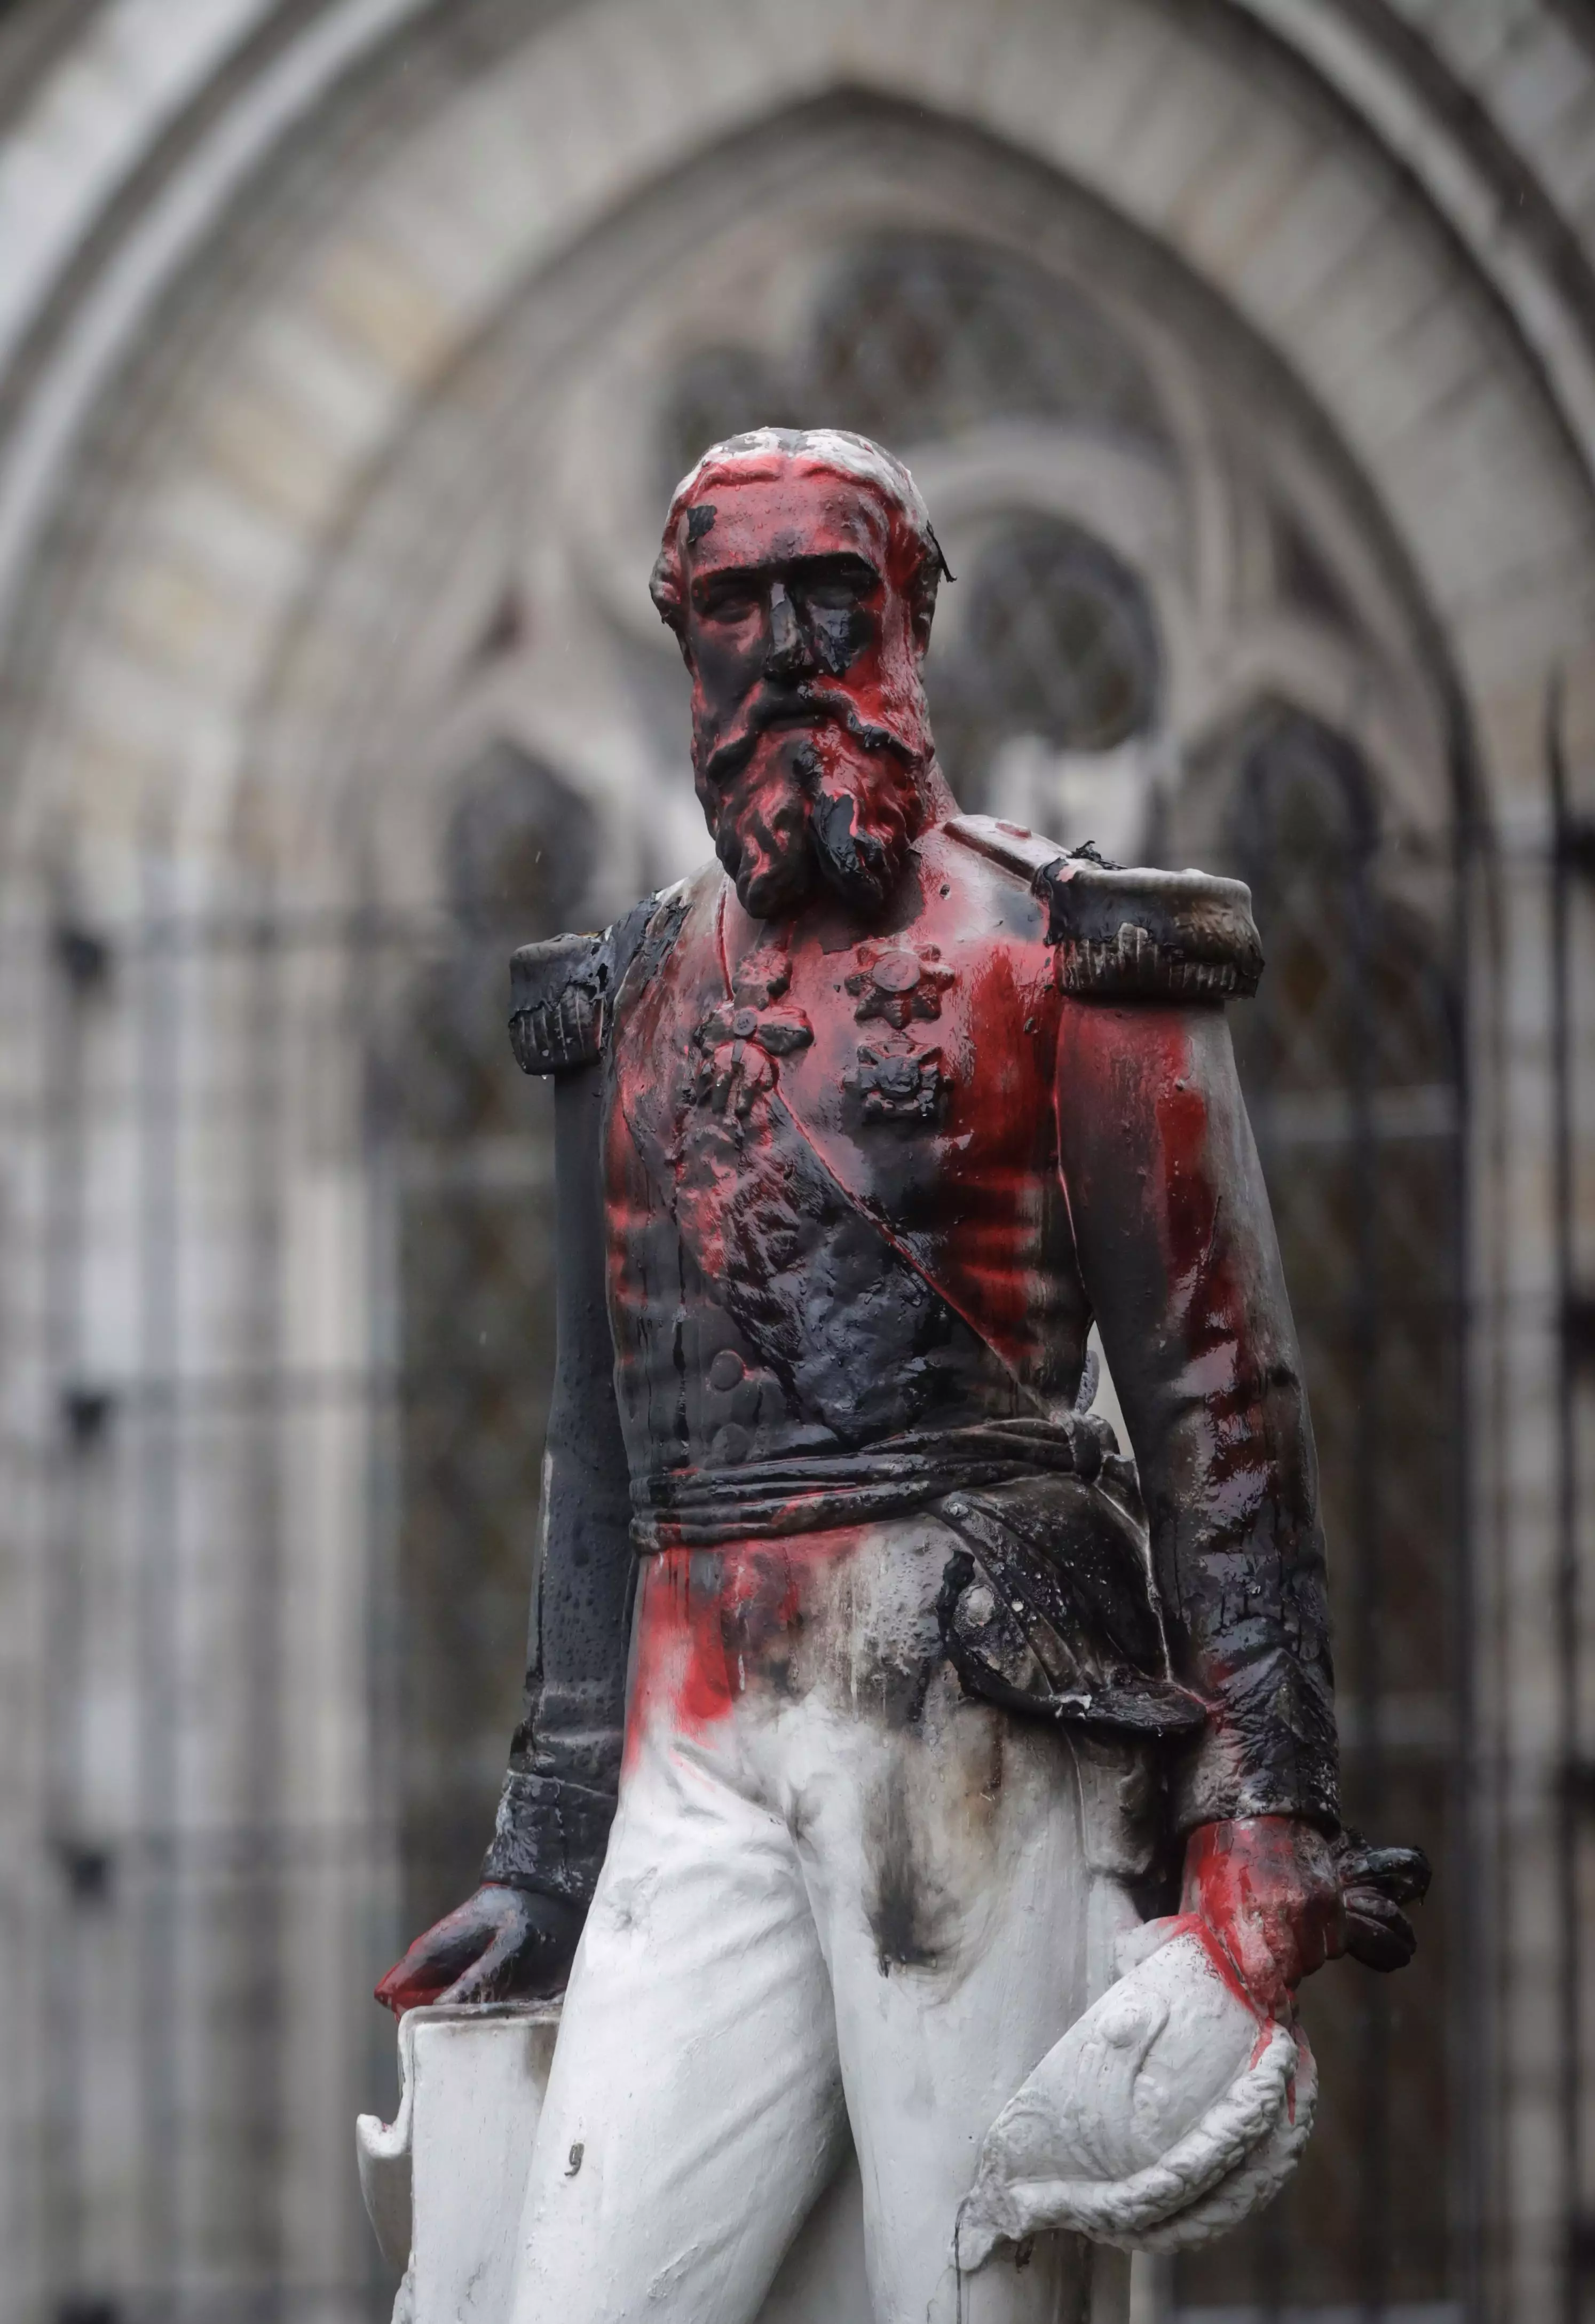 The Leopold II statue in Antwerp had been set on fire and covered in red paint.